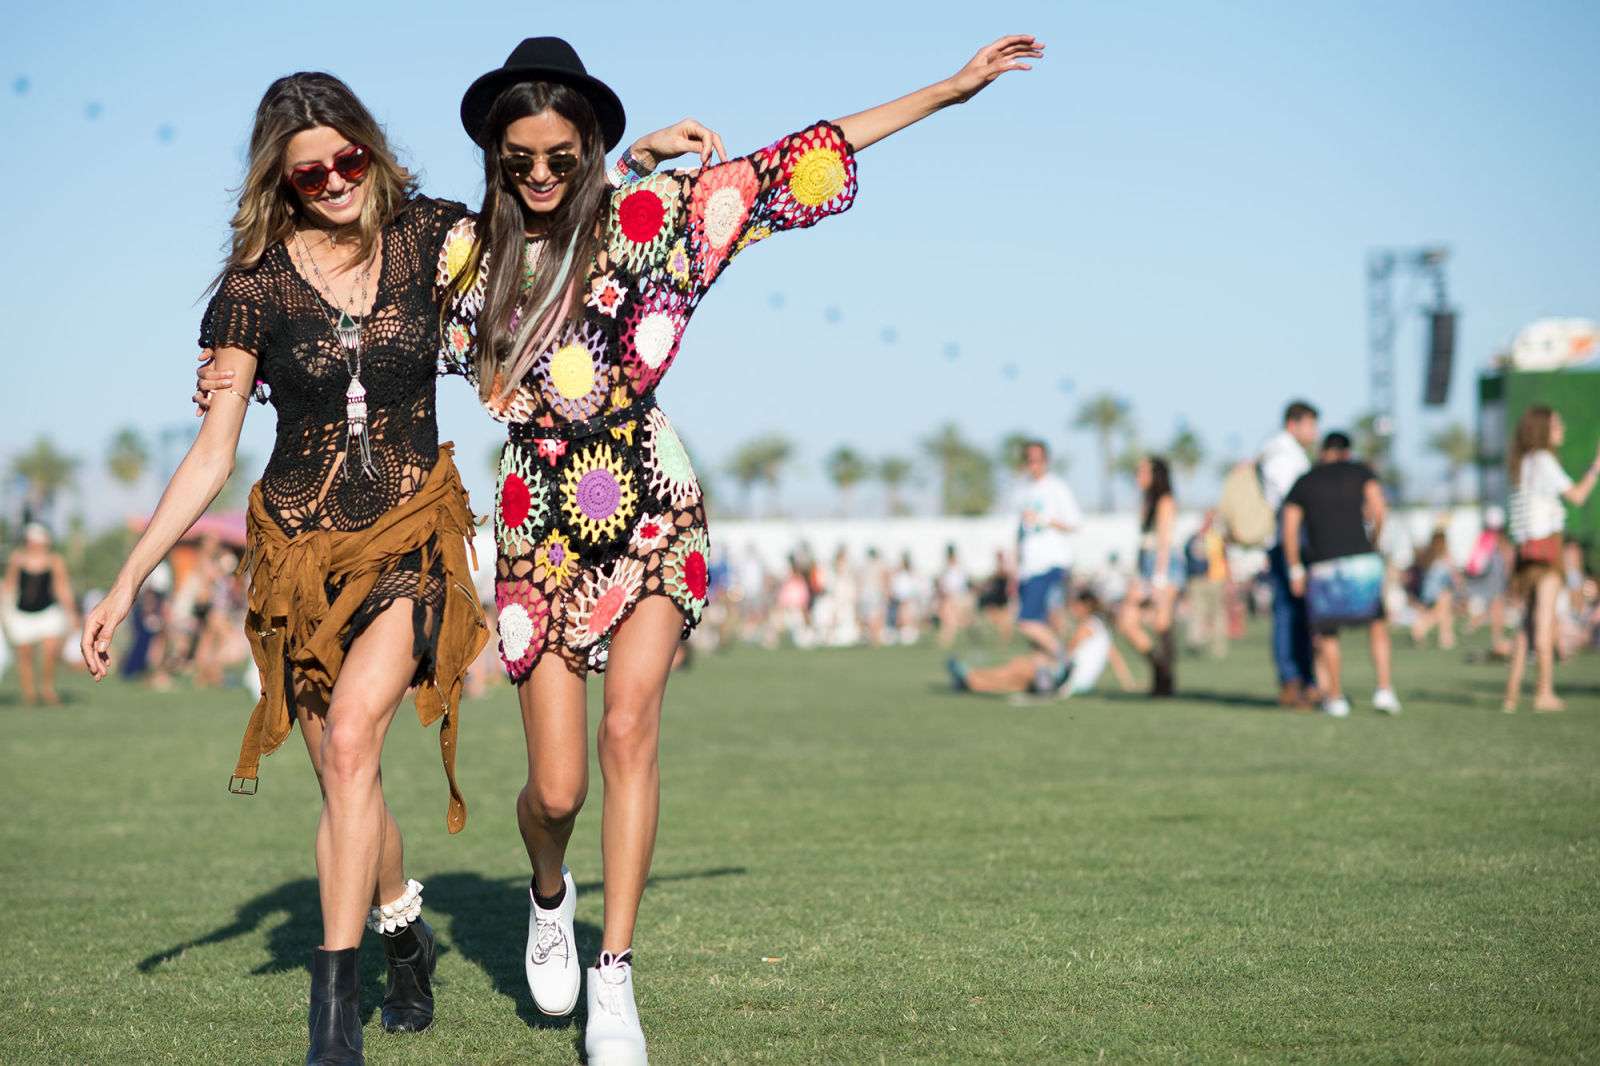 Festival Ready: What To Wear? These 3 Clothing Stores in Los Angeles Will Help